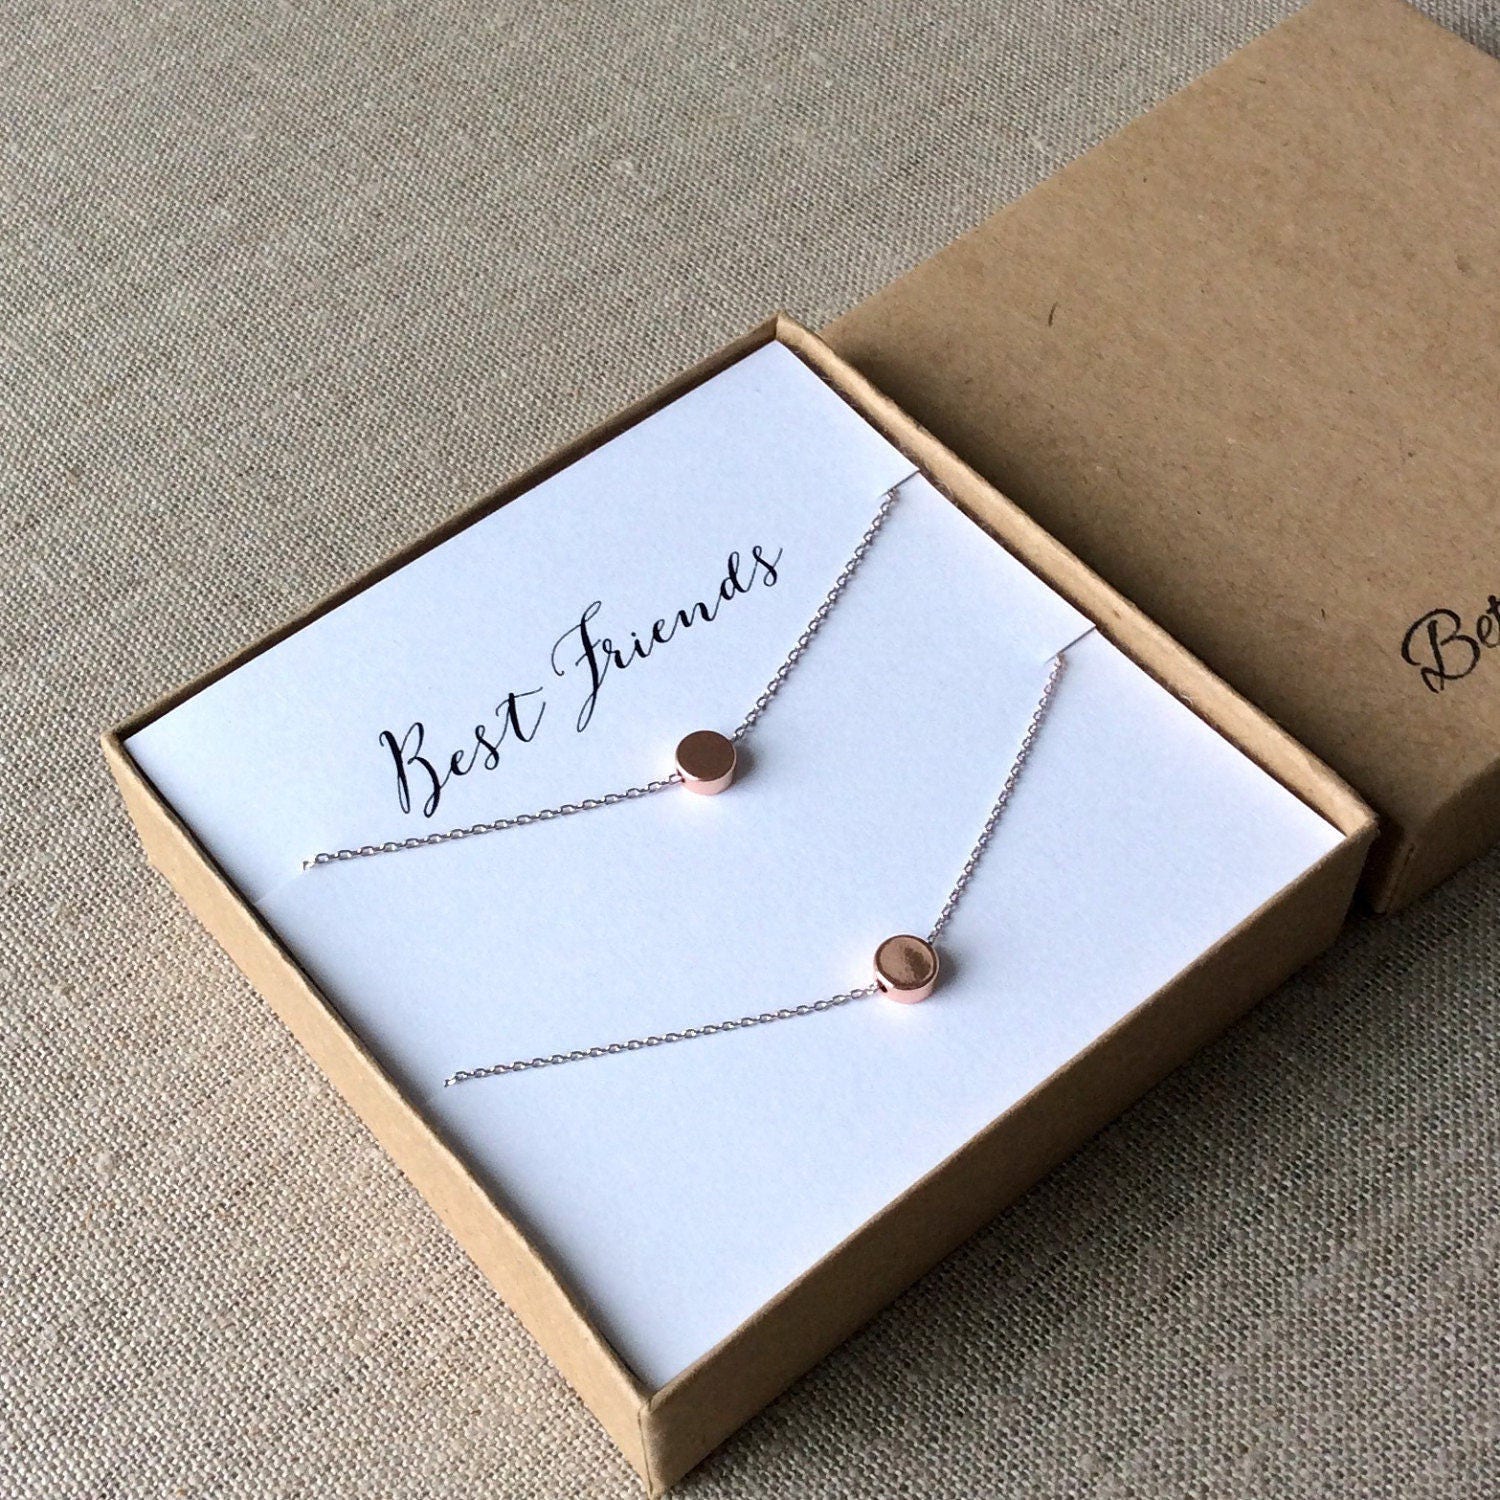 Rose Gold Round Charm Necklace set, small dot charm necklace, best friend necklaces, Gift for twins, best friend gift, matching necklaces